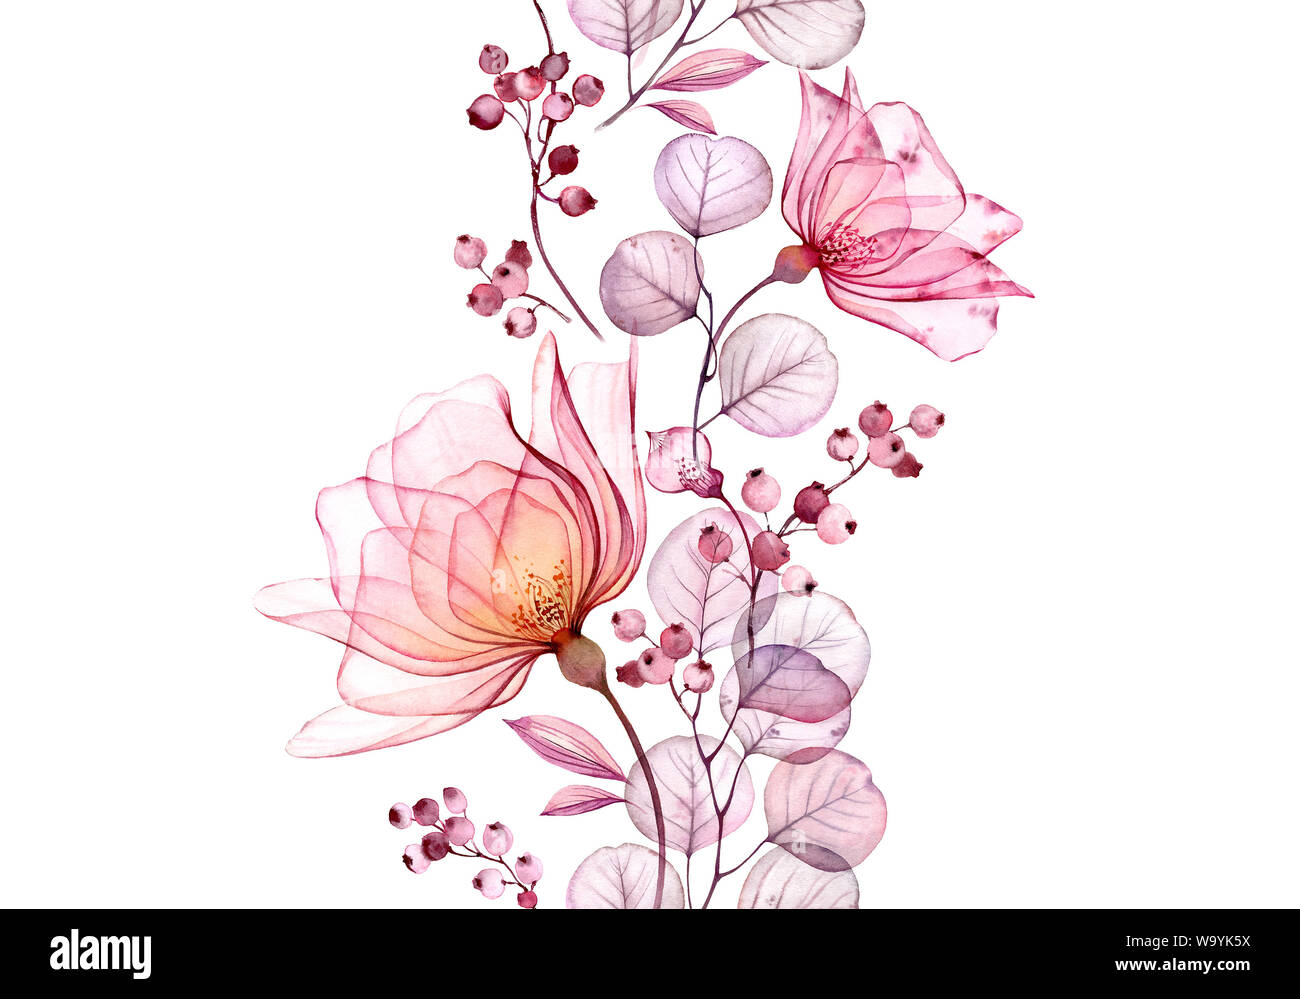 Transparent watercolor rose. Seamless vertical border floral illustration. Isolated hand drawn arrangement with berries for wedding design, stationery Stock Photo